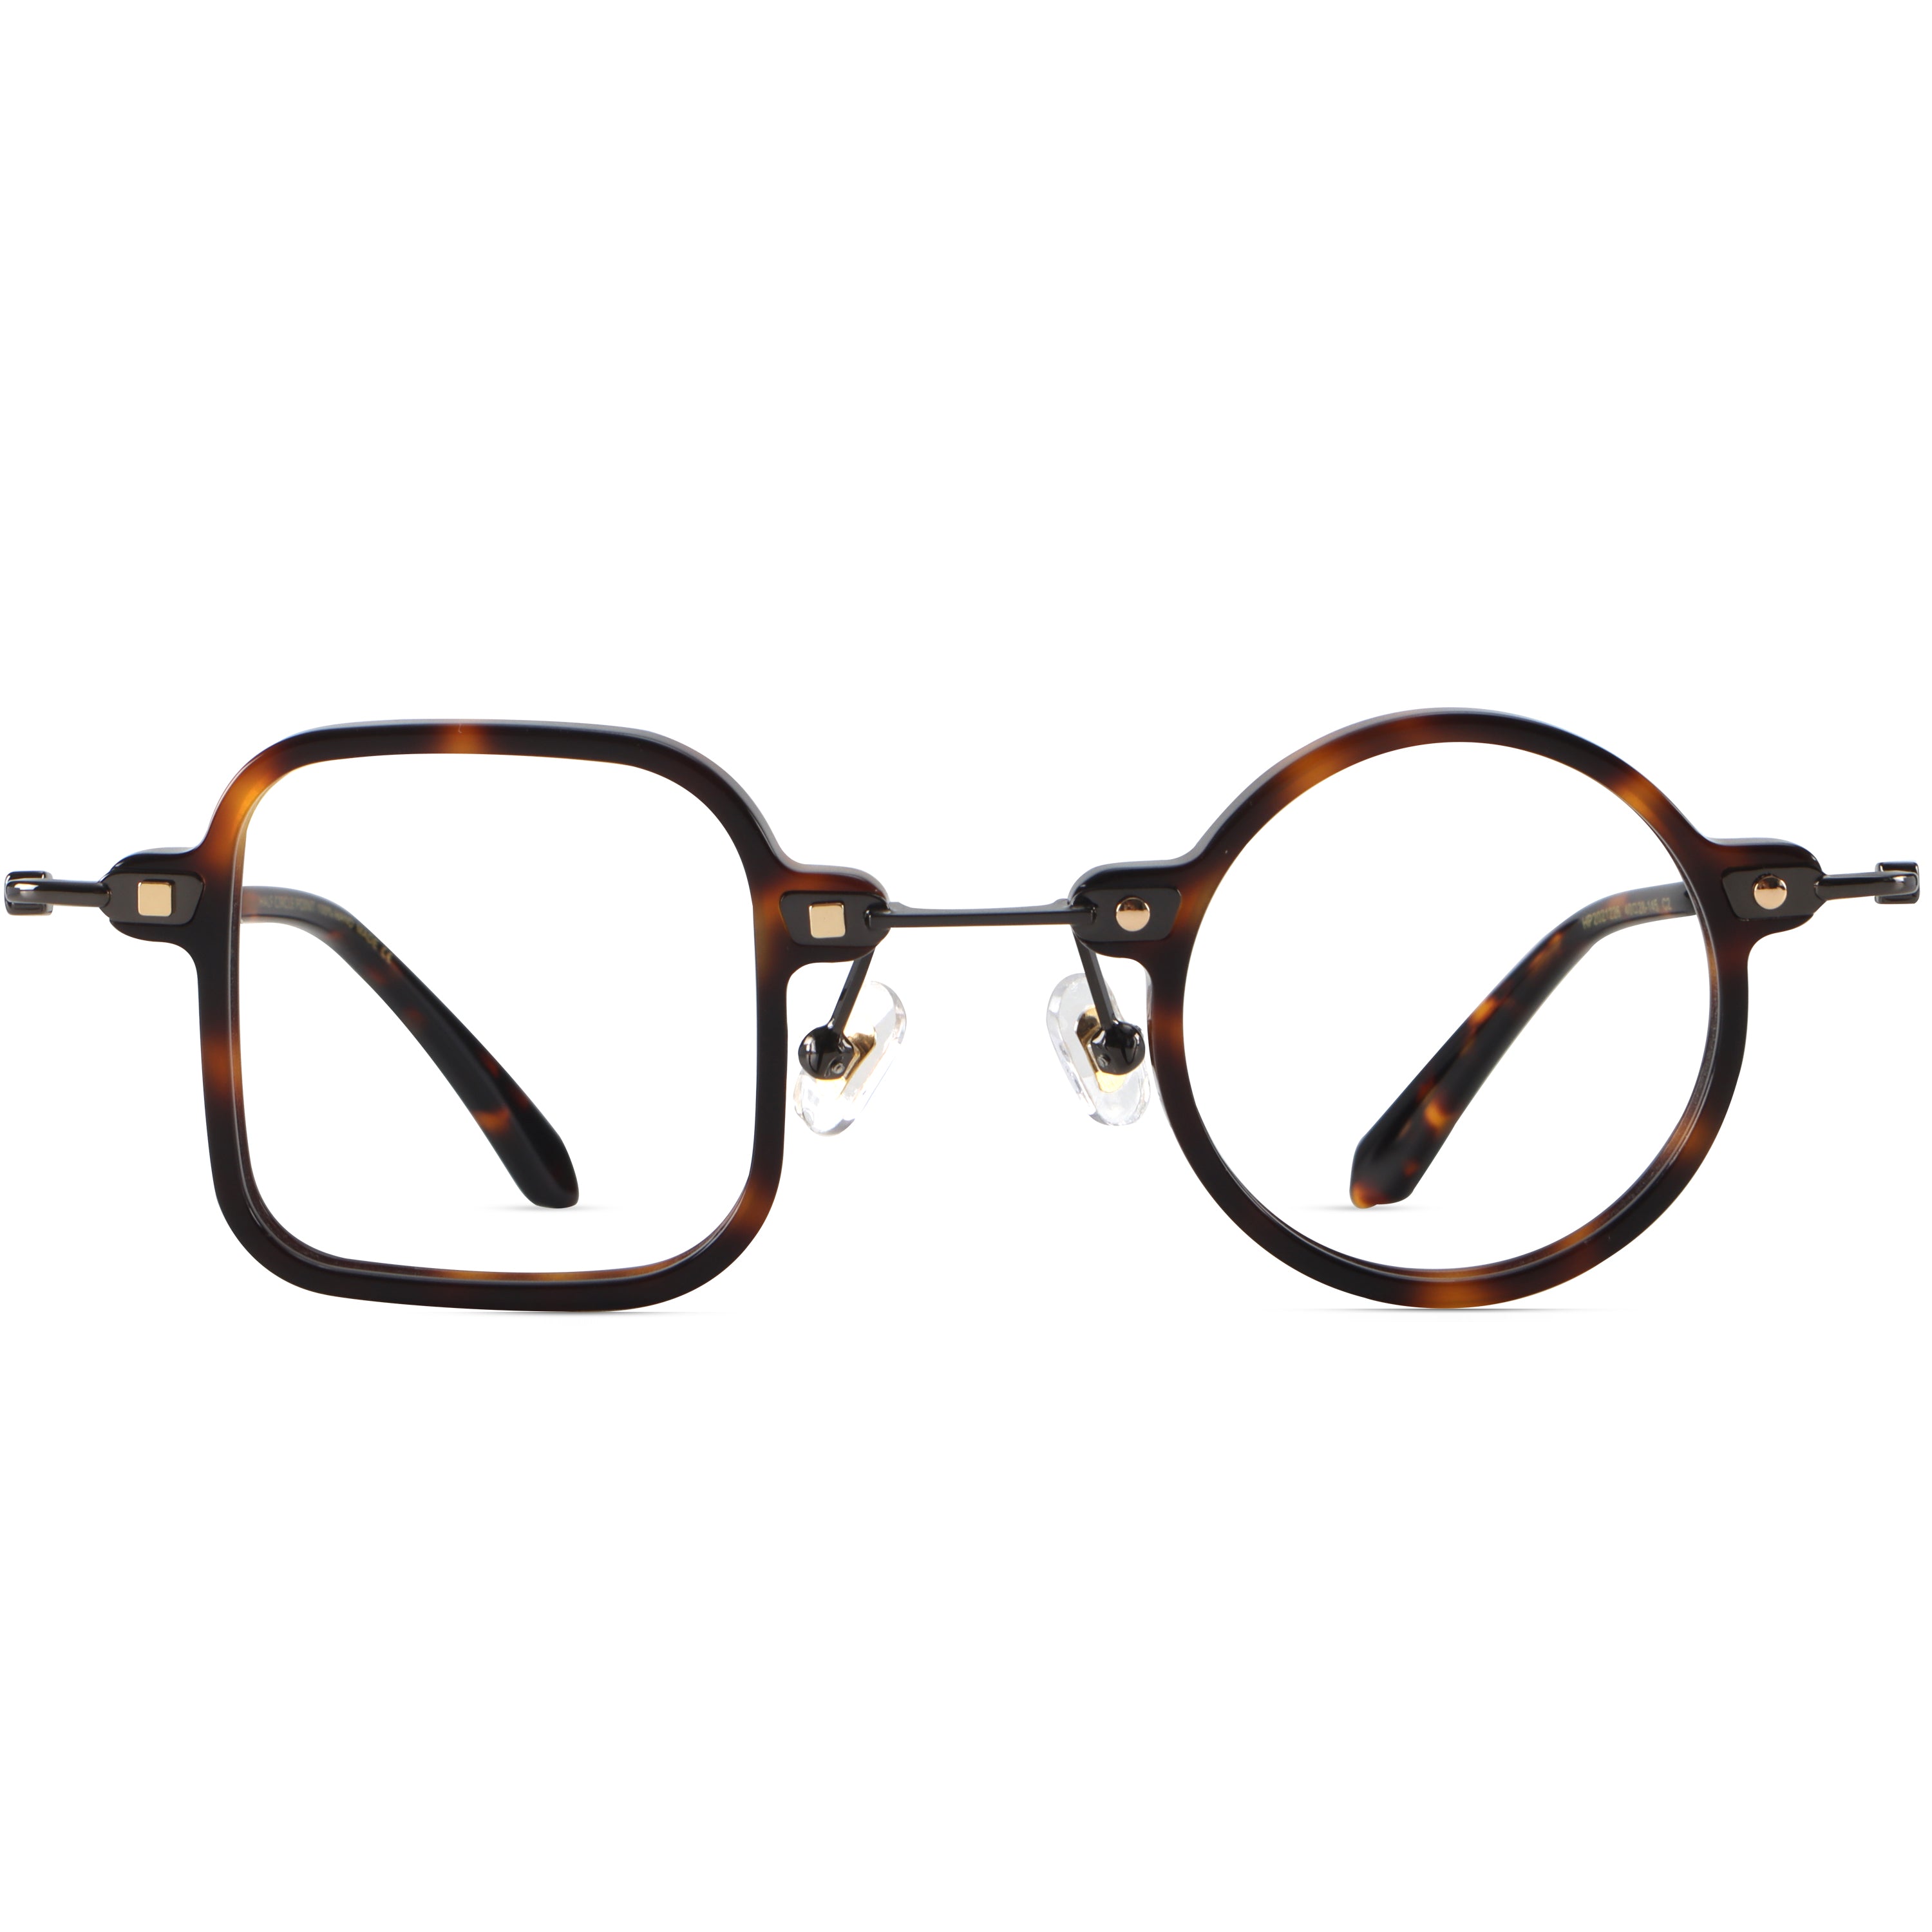 Bance | Square and Round/Tortoise/Metal